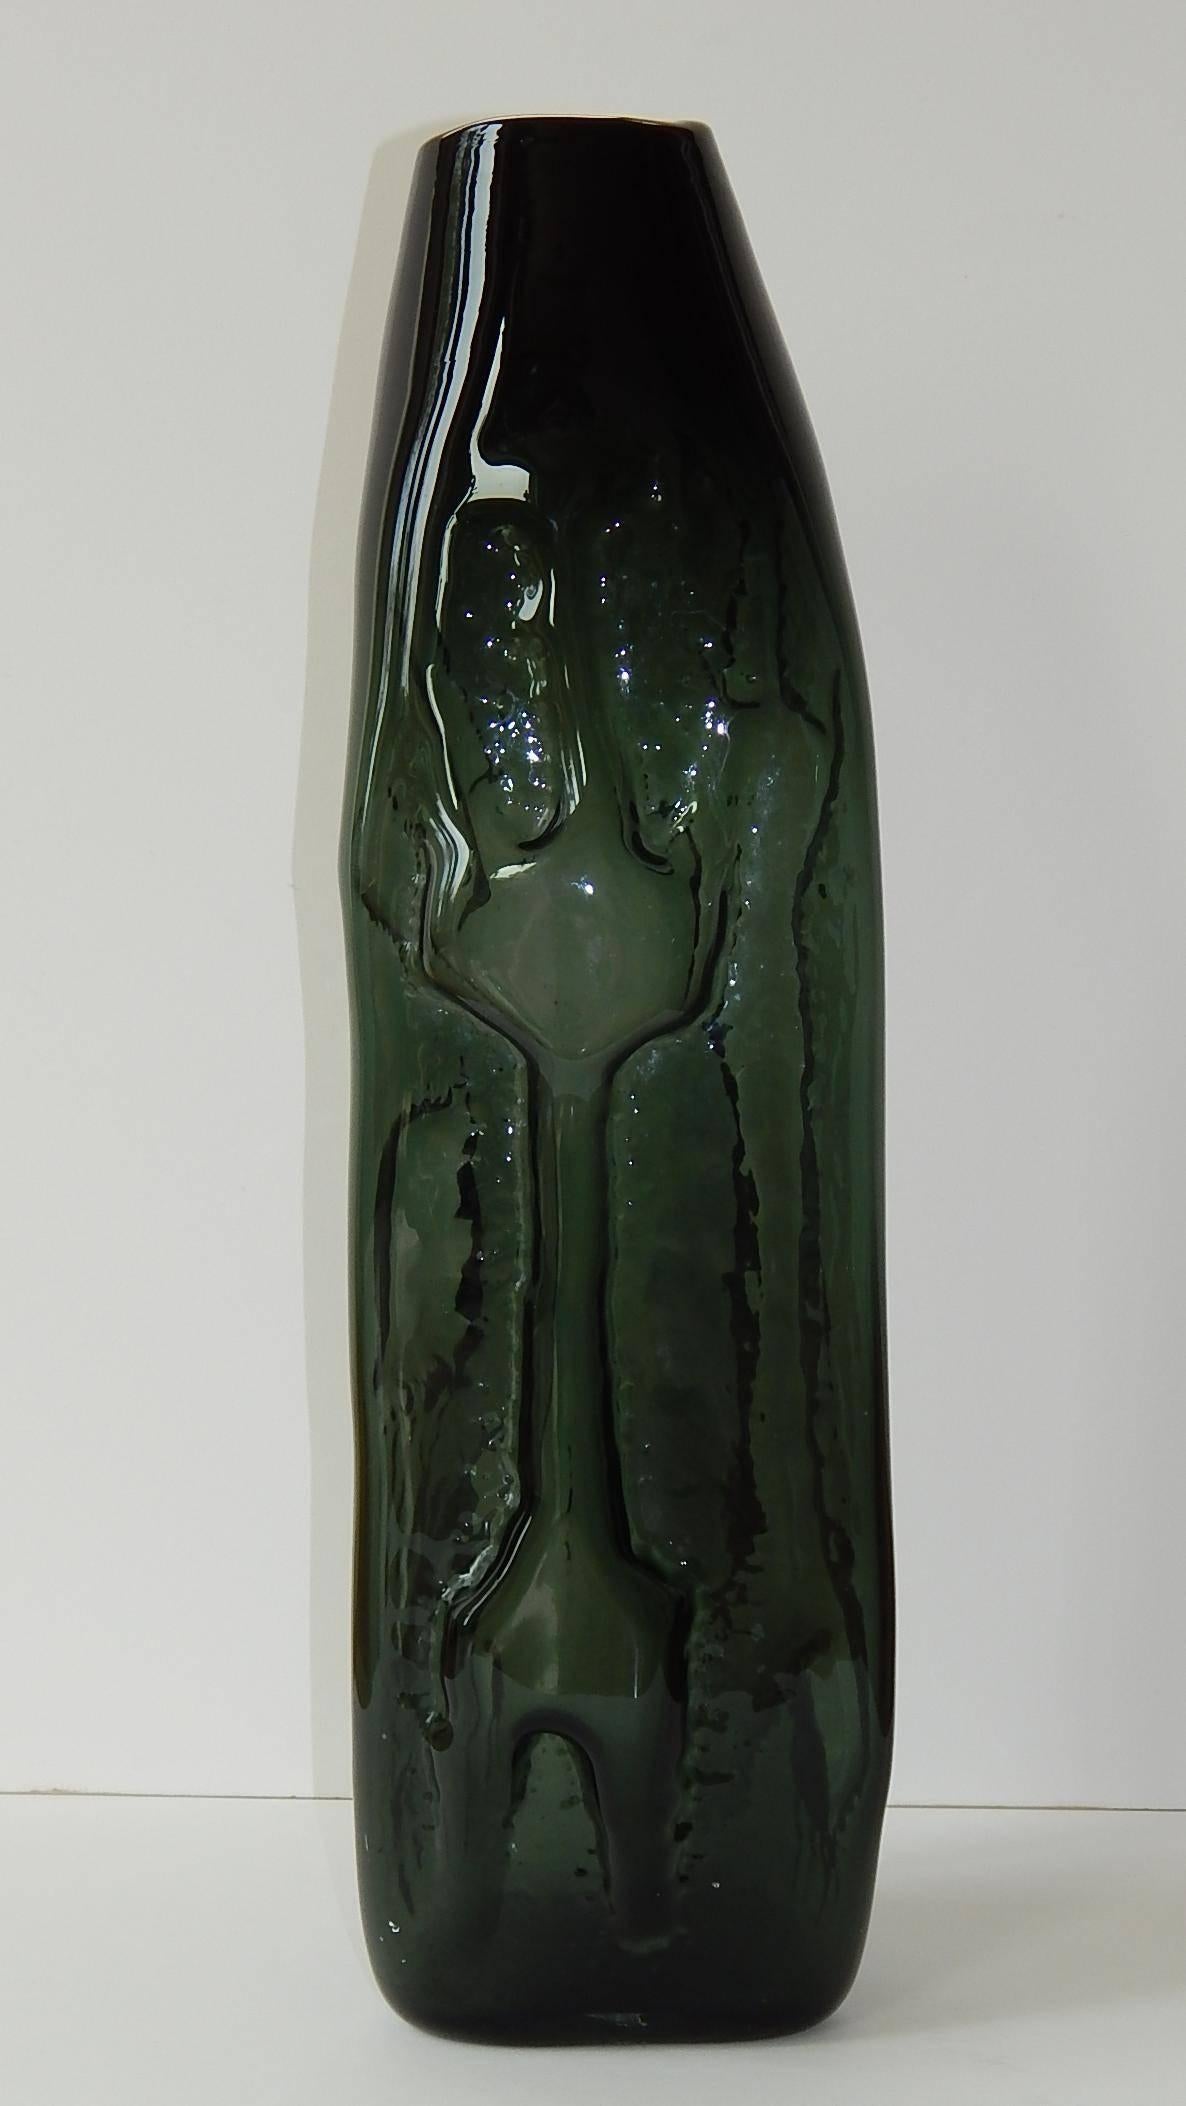 This incredible Blenko Glass vase measures 22.25 inches tall.
Designed by John Husted who affectionately called this his 